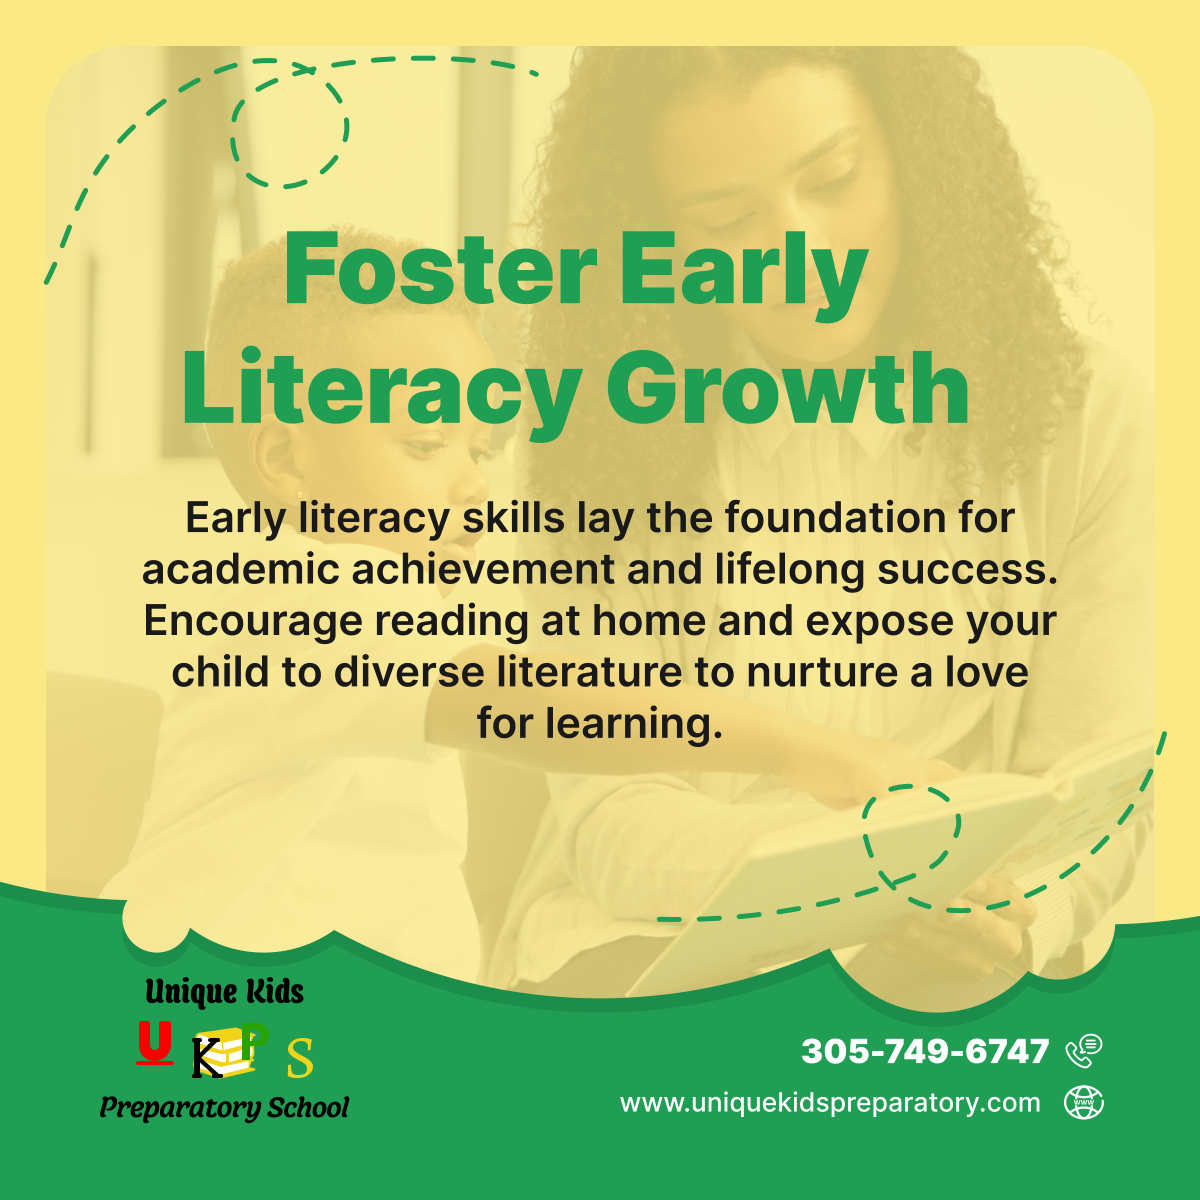 Spark a lifelong love for reading and learning by nurturing early literacy skills in young children. Together, let's unlock the magic of storytelling and imagination. 

#EarlyLiteracy #PreparatorySchool #MiamiFL